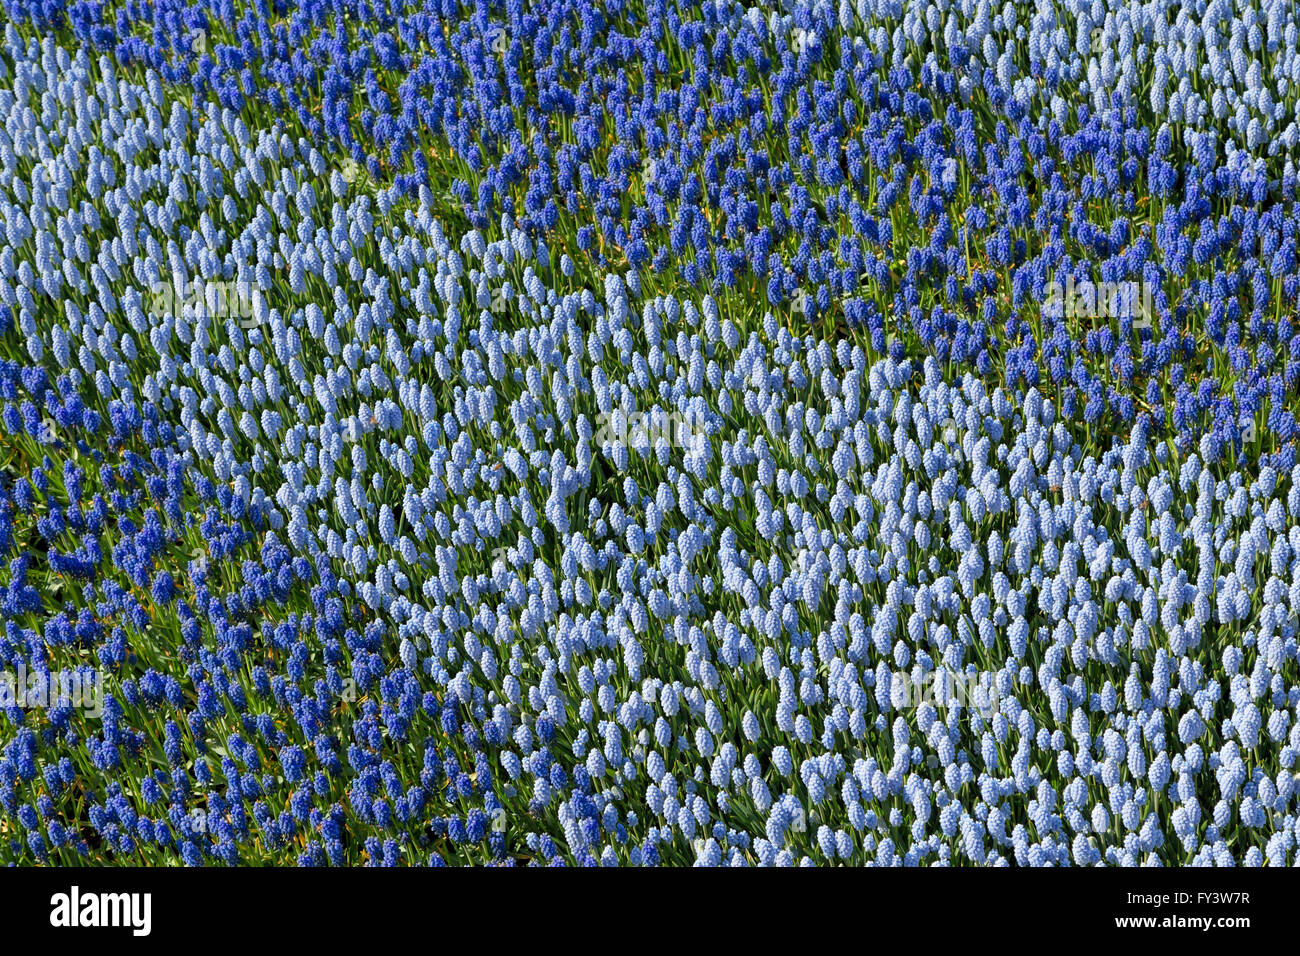 Muscari, forming a part of a flower mosaic, called 'The Golden Age'' at the Keukenhof, Lisse, South Holland, Netherlands. Stock Photo